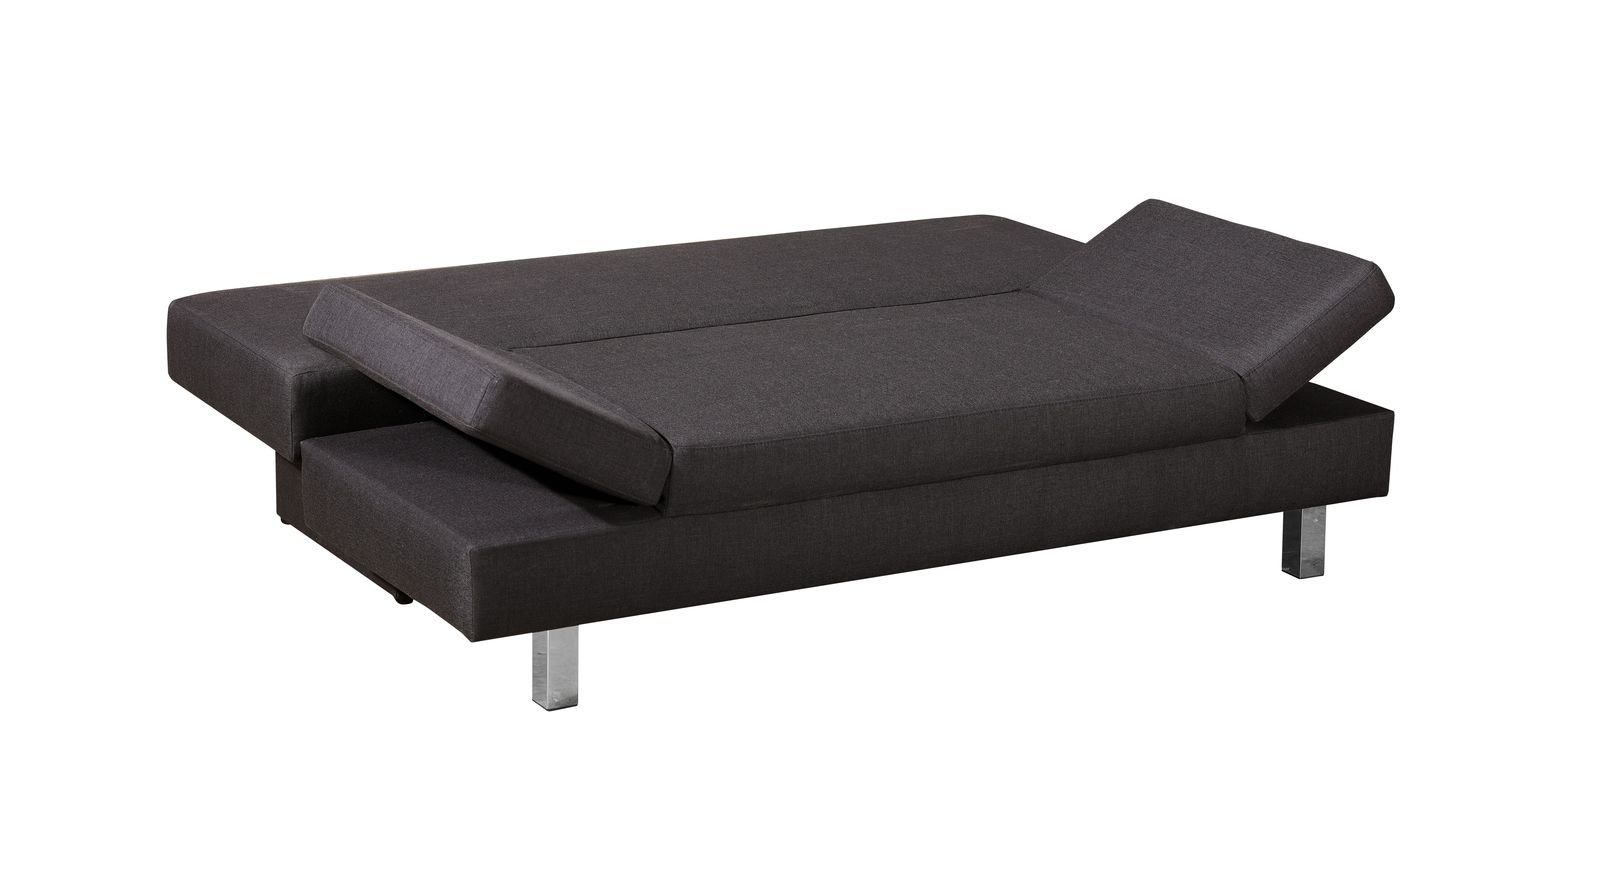 Funktionales und bequemes Schlafsofa Blue-River